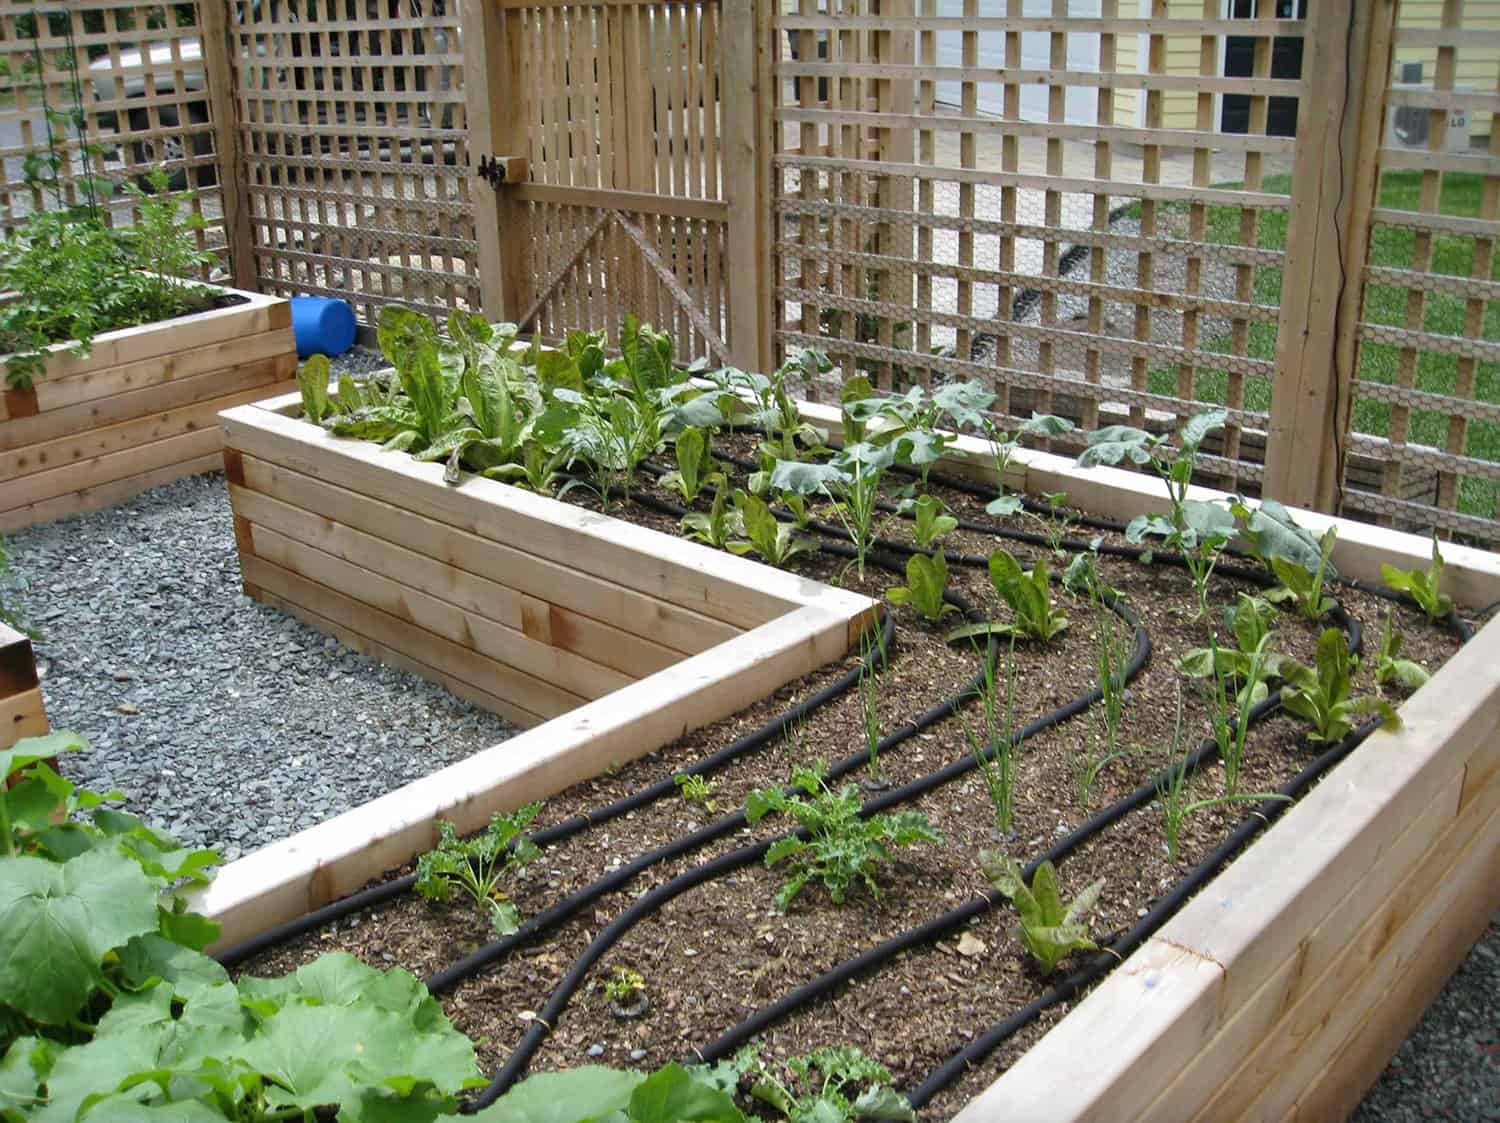 fenced-garden-with-raised-beds-and-growing-vegetables